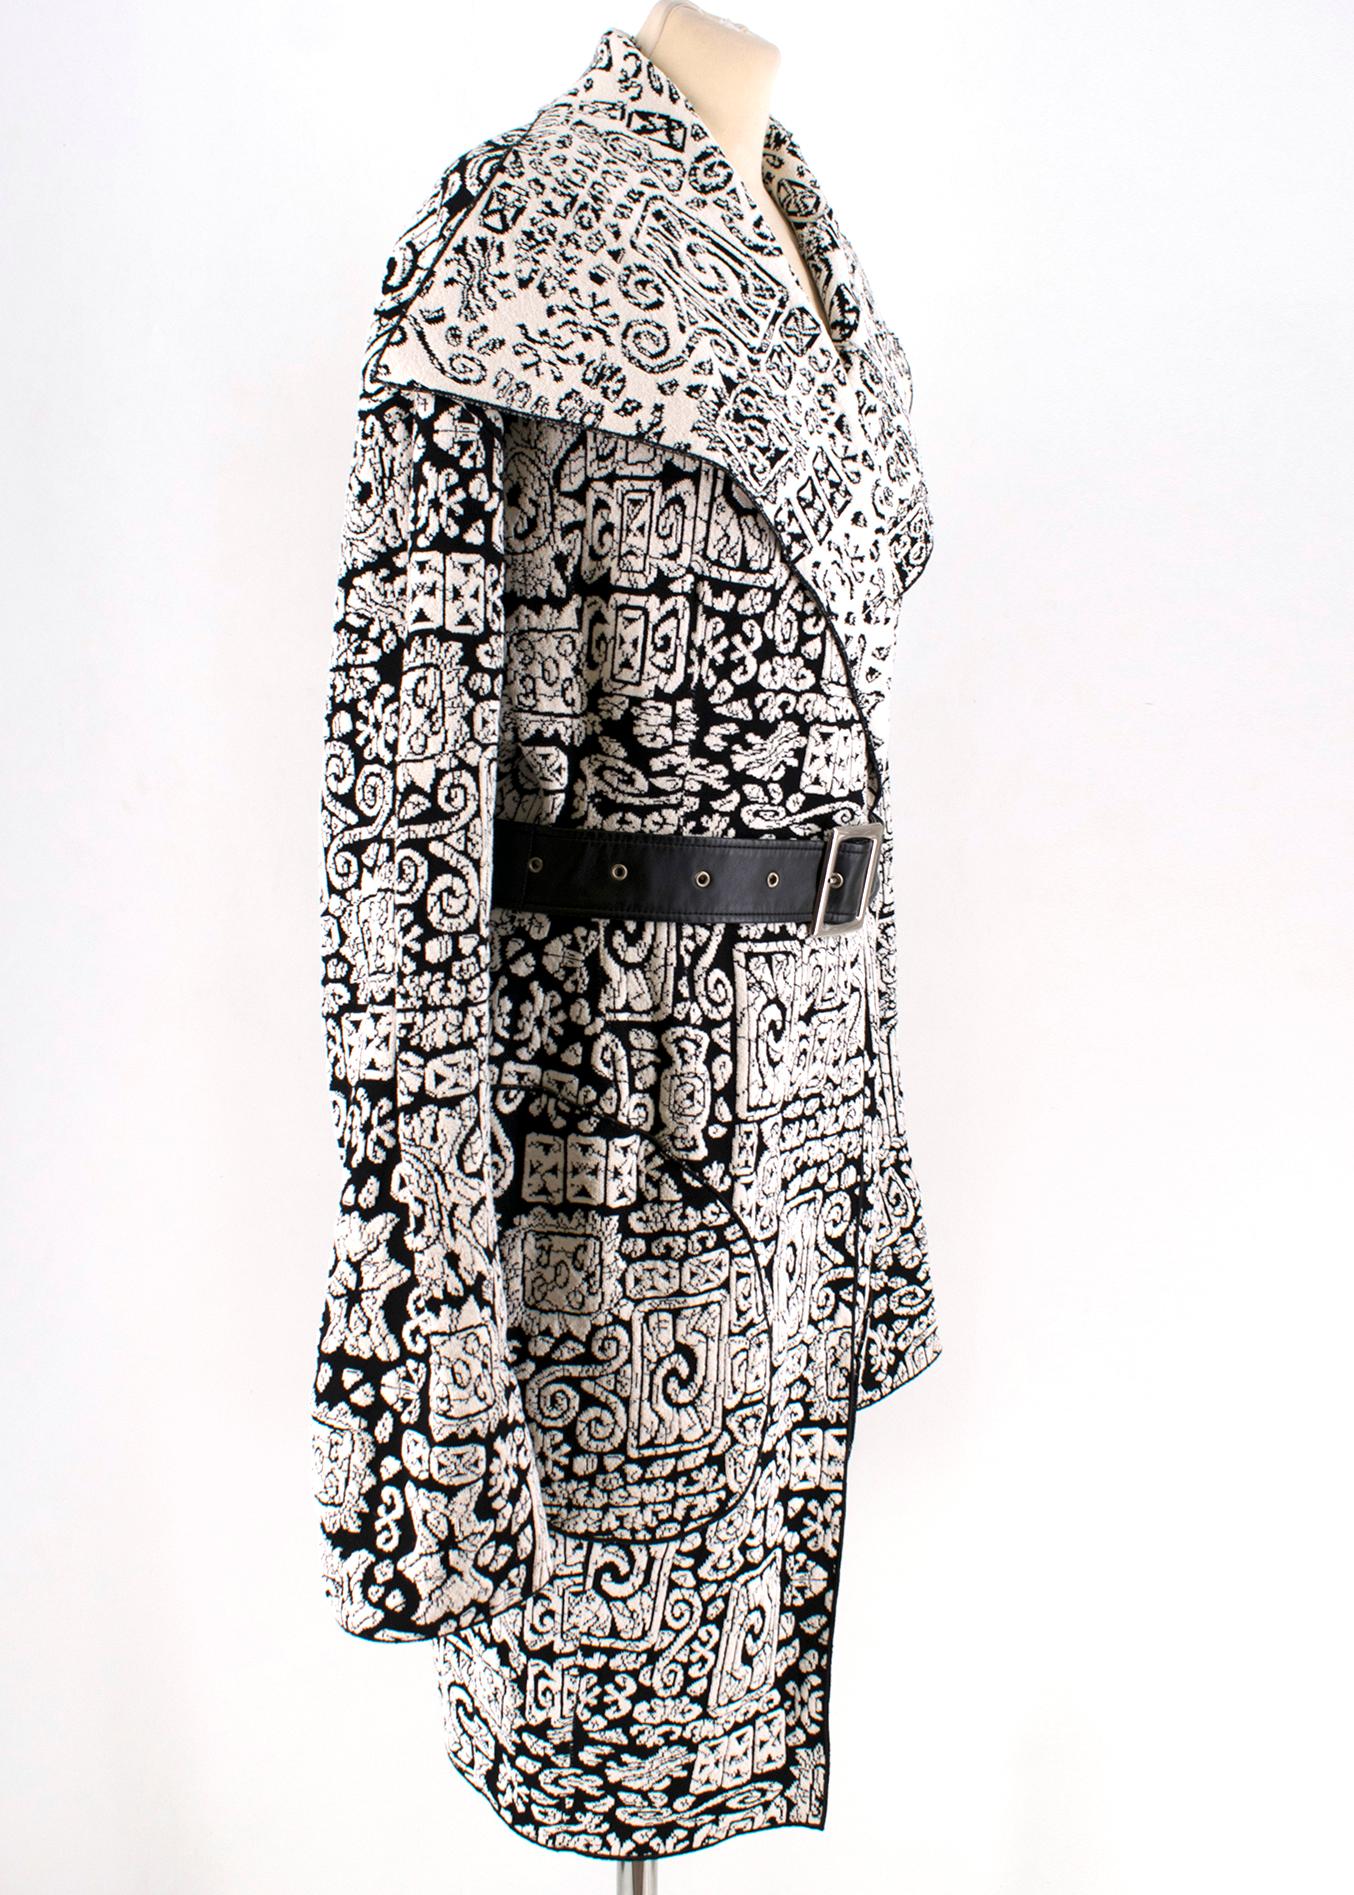 Celine Black & White Knitted Jacquard Coat

-  Black & White Long Sleeve Wrap Coat
- Wrap style front
- Leather-effect waist belt 
- Jacquard Motifs
- Mid-weight


Please note, these items are pre-owned and may show some signs of storage, even when